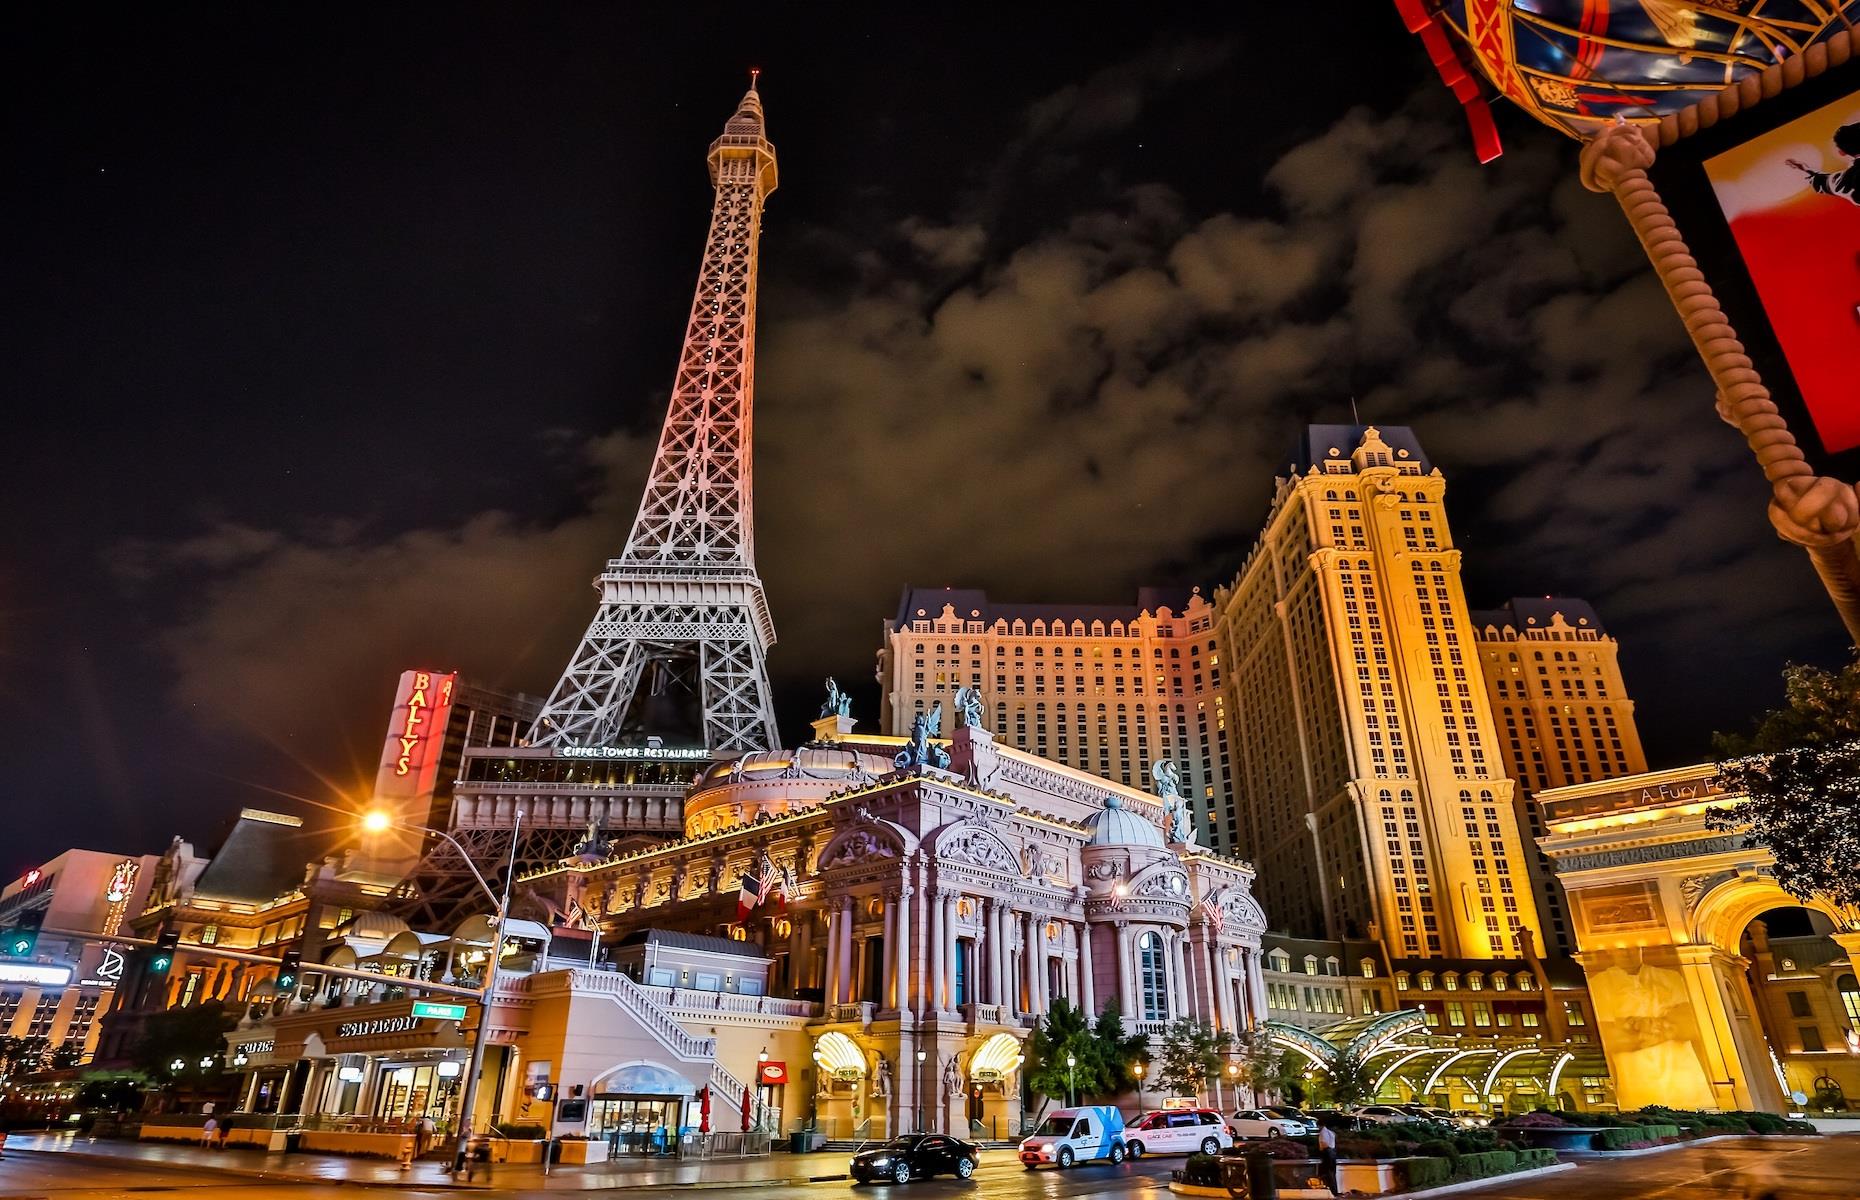 <p>There’s a definite sense of joie de vivre about this well-known Las Vegas landmark, which opened in 1999, bringing a little Parisian charm to the Strip. Covering 24 acres, the resort features 2,916 guestrooms, an 85,000-square-foot (7,896sqm) casino and replicas of landmarks, including a 50-story Eiffel Tower, Arc de Triomphe, façades of the Louvre and the Paris Opera House, as well as its 34-story hotel tower which emulates the Hôtel de Ville. Go up the tower for one of the top views of Sin City.</p>